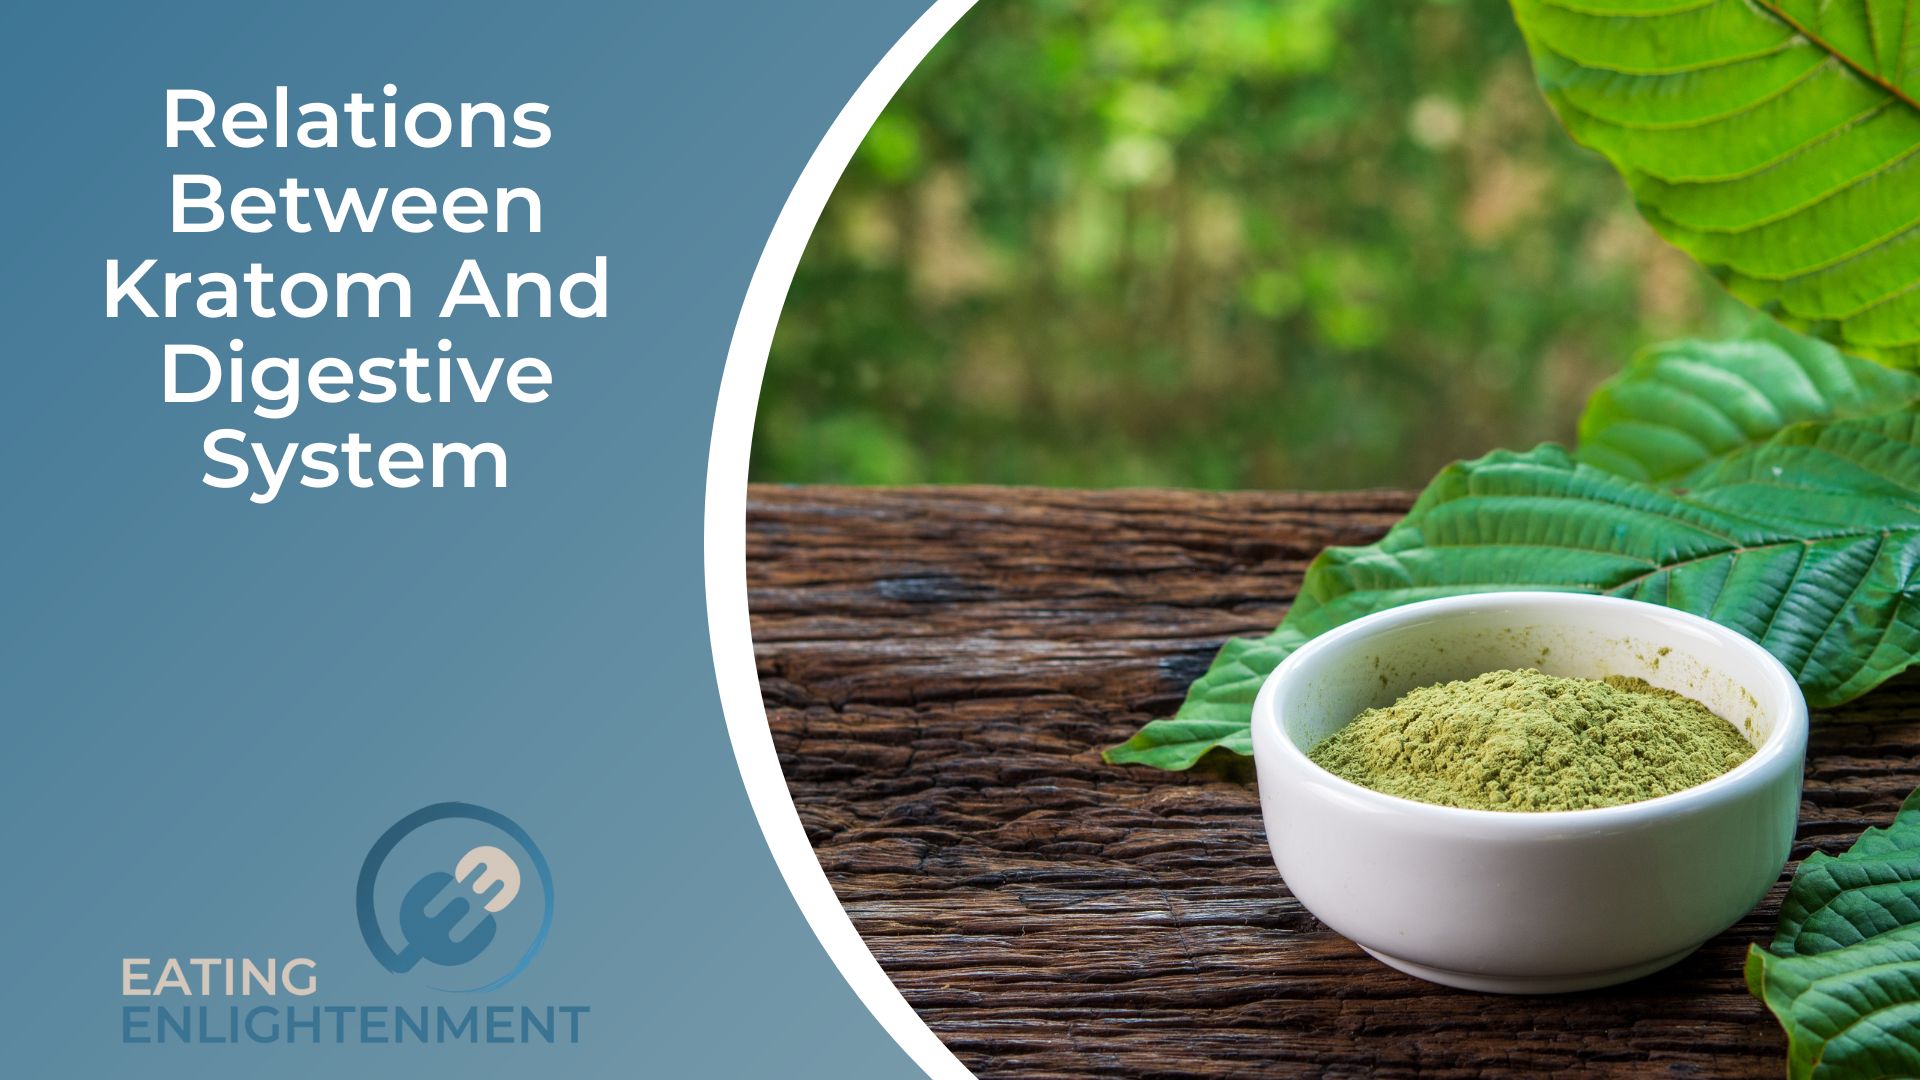 Relations Between Kratom And Digestive System